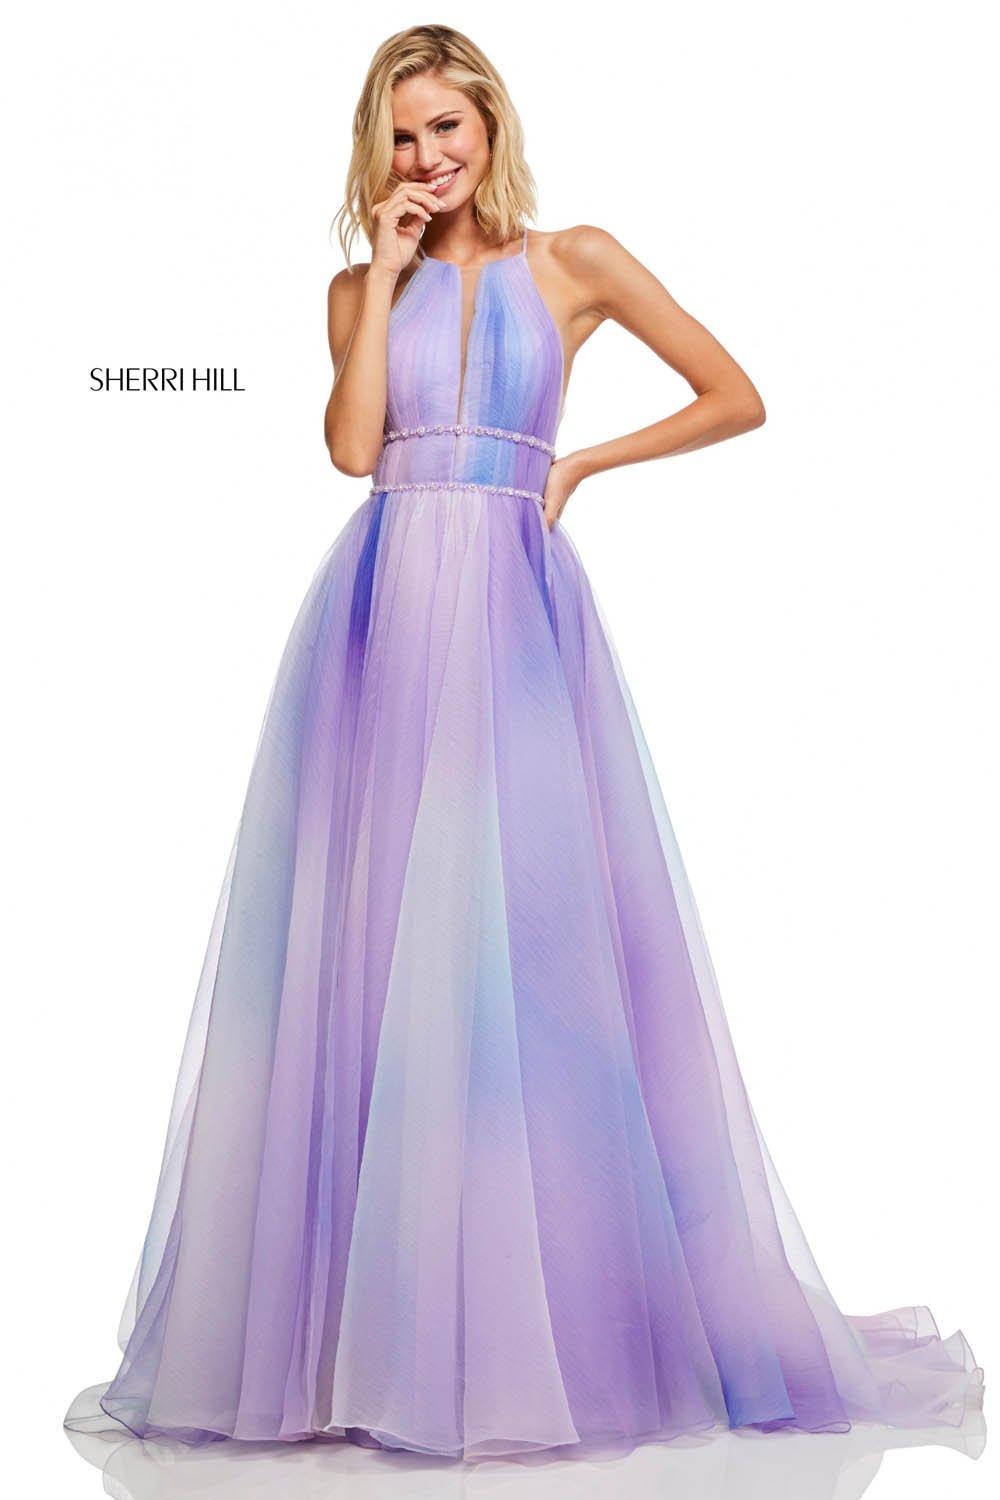 Sherri Hill 52711 dress images in these colors: Lilac, Light Blue, Pink Green.